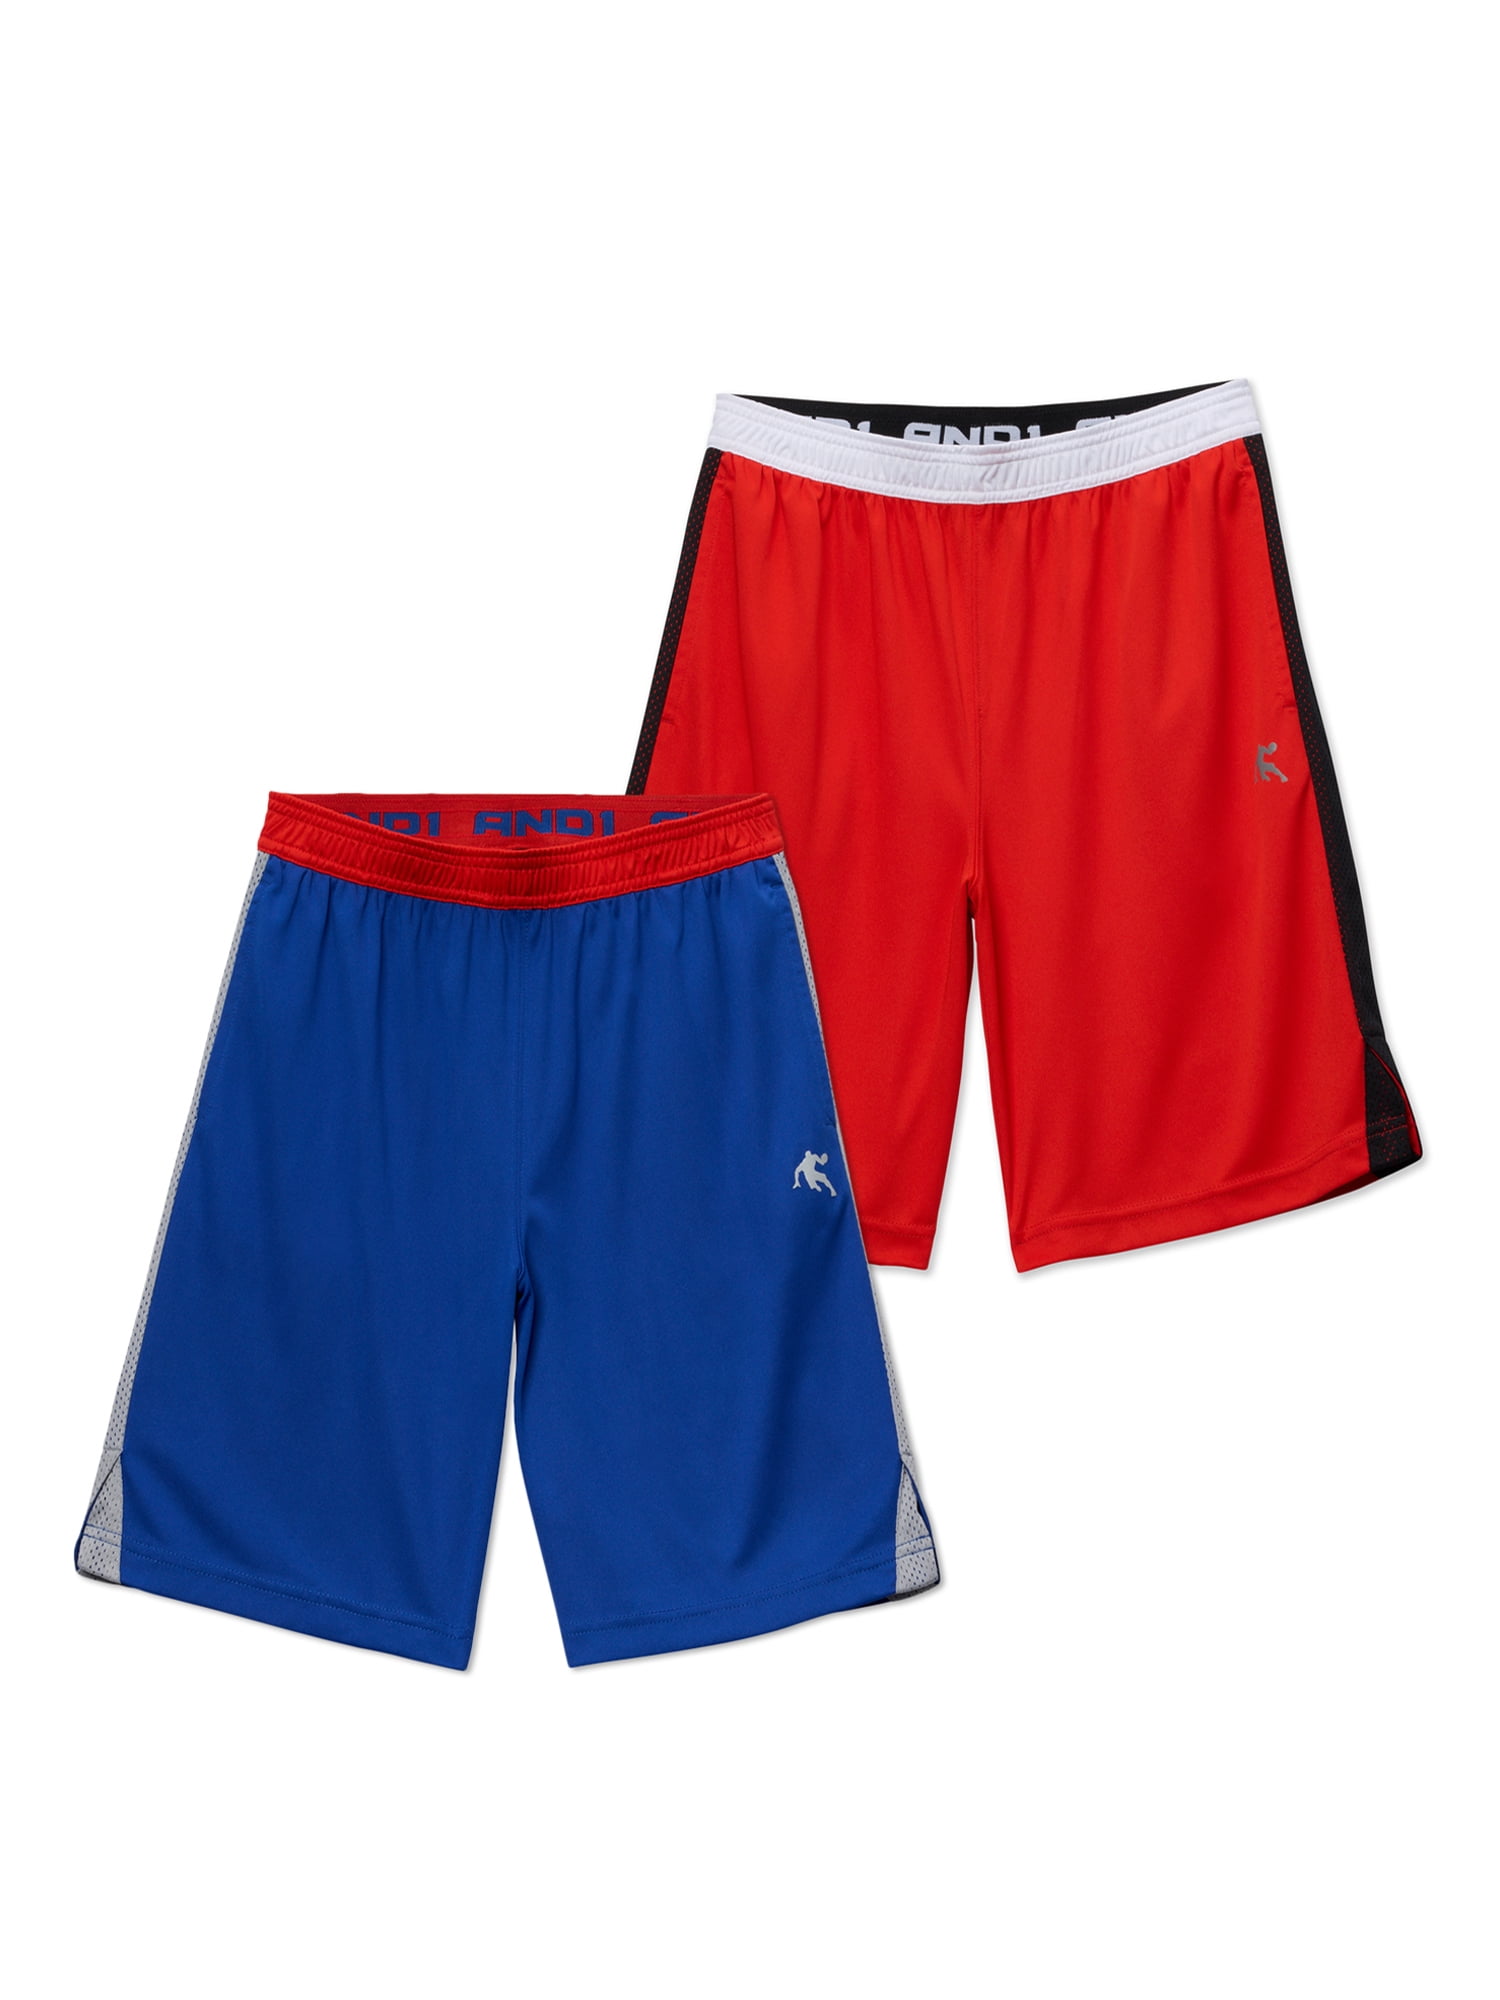 AND1 Boys Mesh Basketball Shorts 2-Pack, Sizes 4-18 